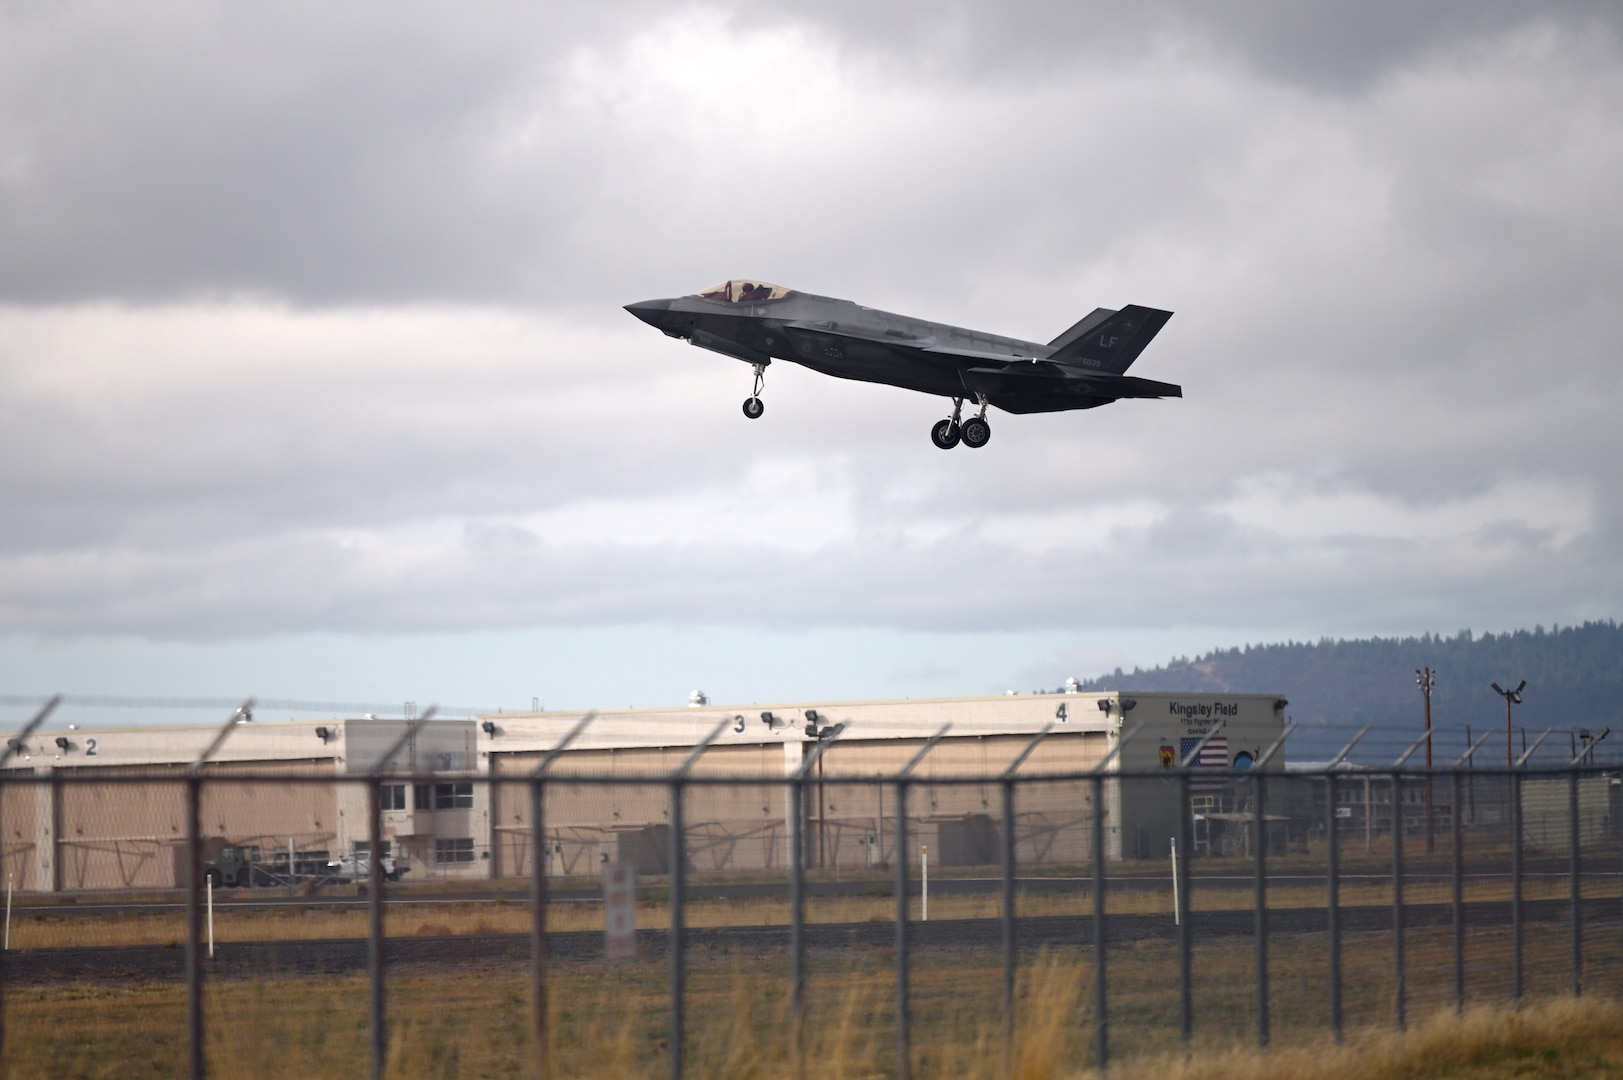 A U.S. Air Force F-35 Lightning II from Luke Air Force Base, Arizona, approches the runway at Kingsley Field in Klamath Falls, Oregon, Oct. 26, 2023. This is the third time the 56th Fighter Wing from Luke AFB spent two weeks in Oregon flying and training with the F-15s from the 173rd Fighter Wing, Oregon Air National Guard.